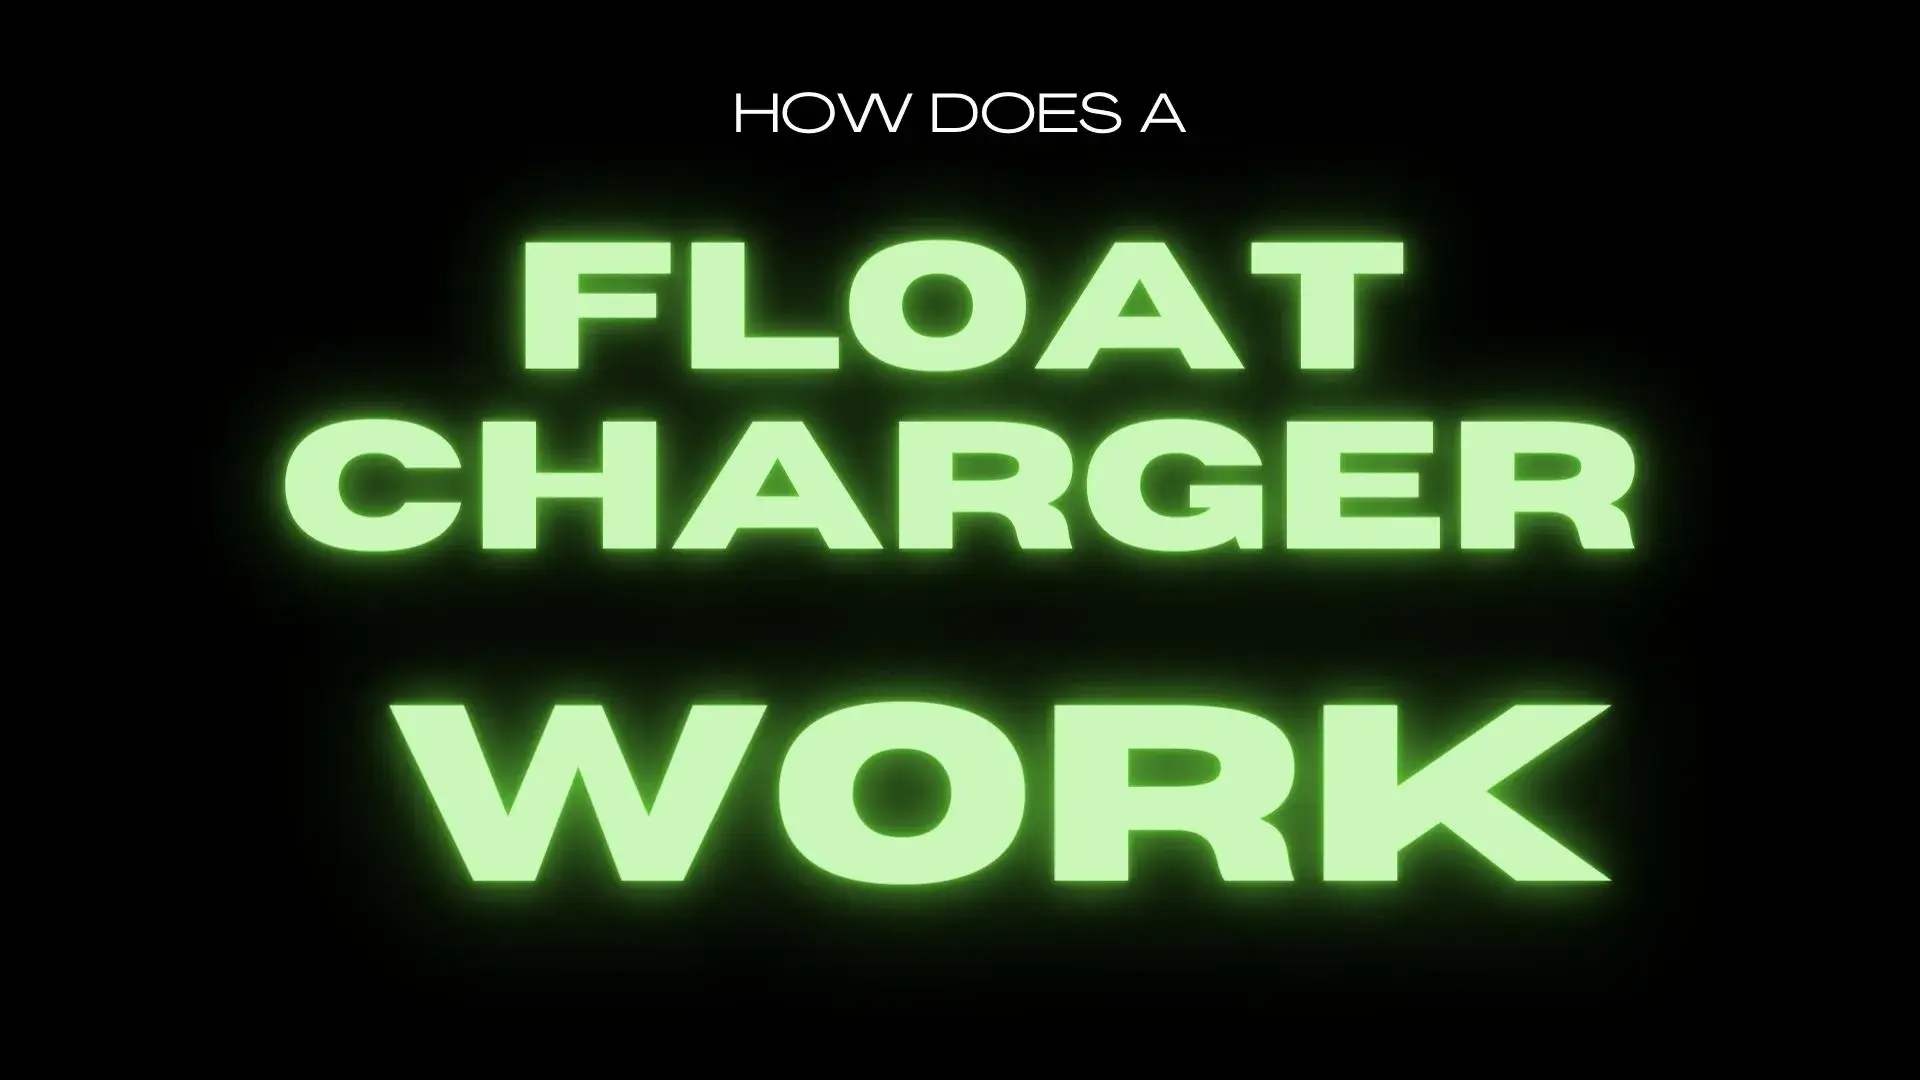 How Does a Float Charger Work